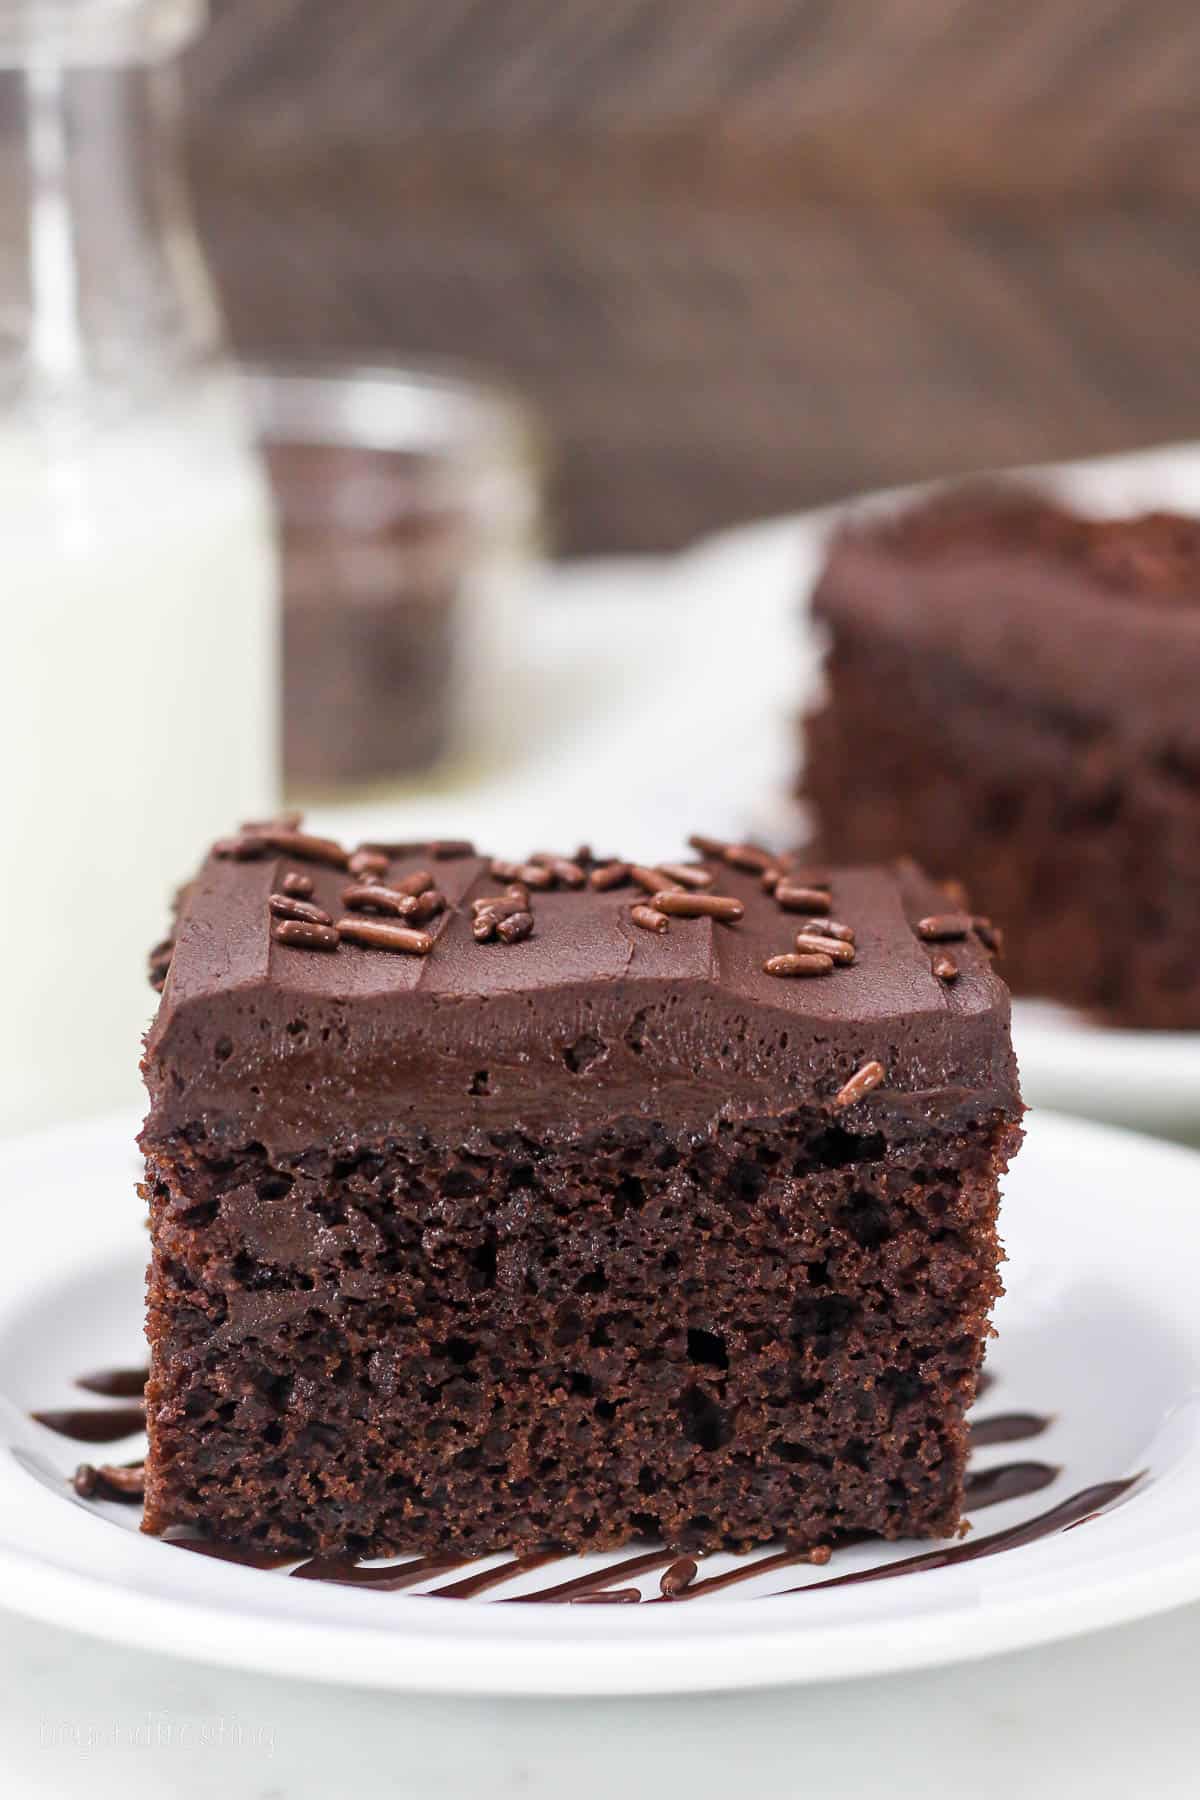 side view of a slice of frosted chocolate cake on a plate drizzled with chocolate